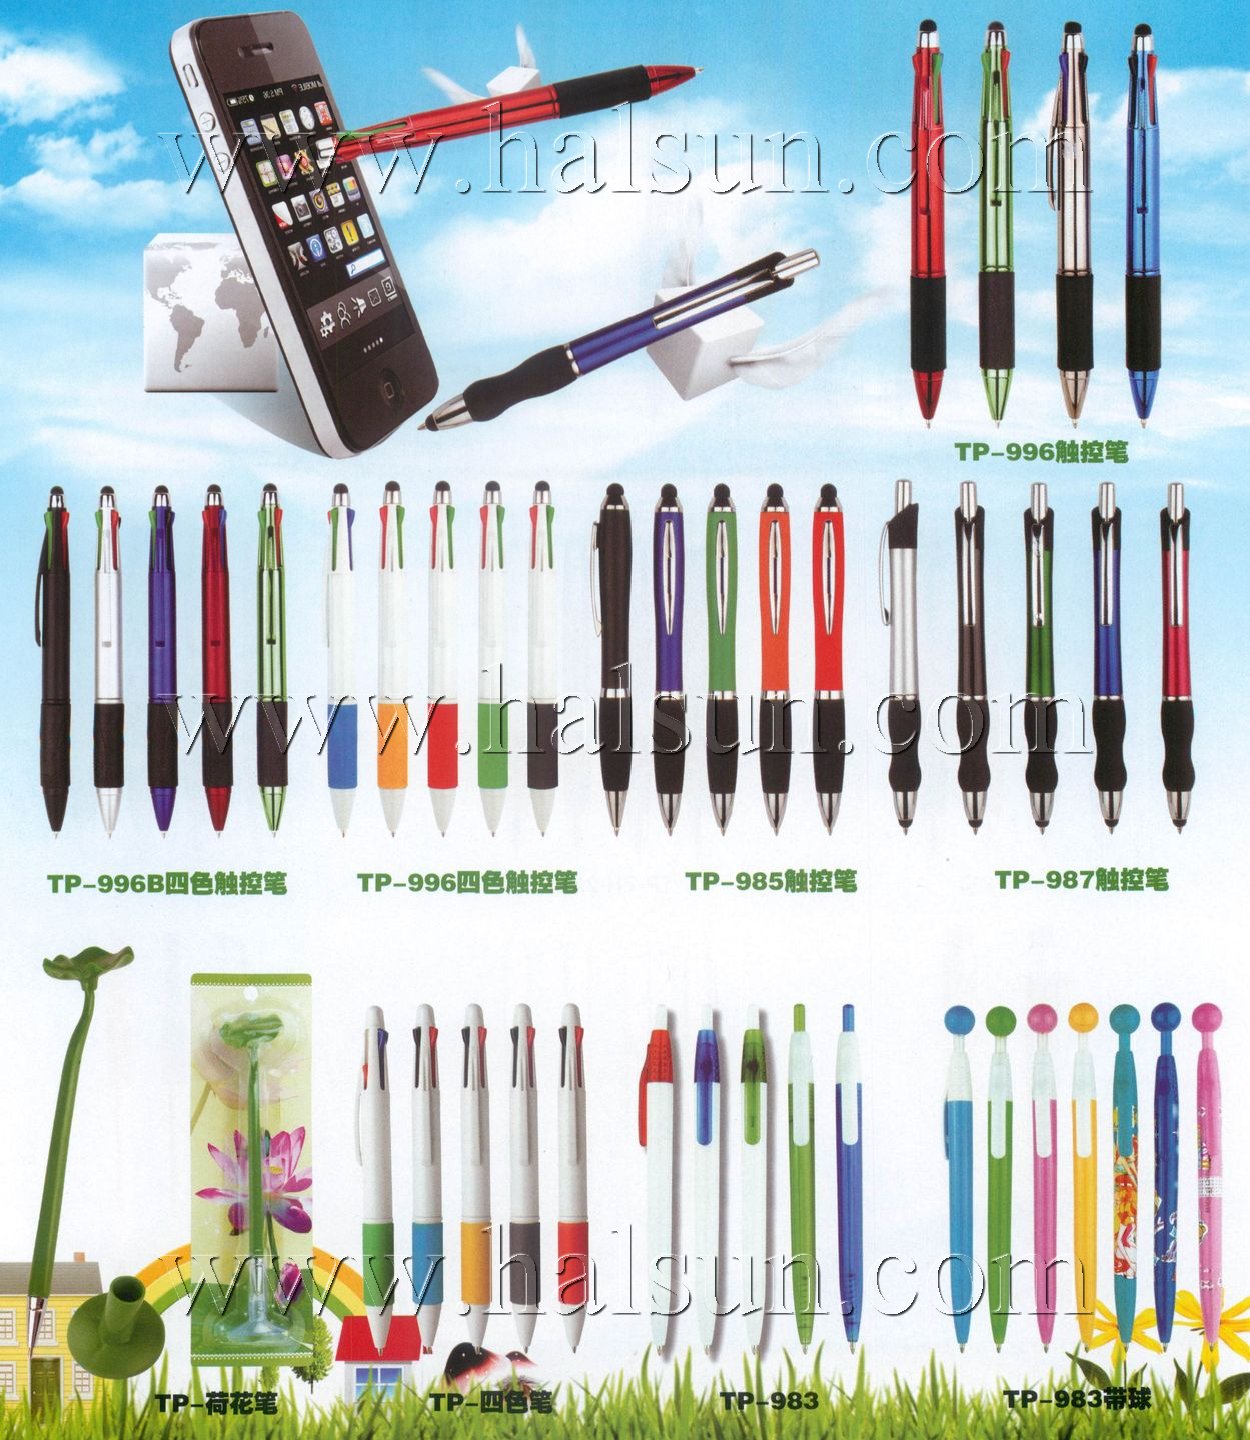 4 color pen with Stylus,Iphone stylus with 4 color pens, 5 in one pens,TP-996,Lotus Leaf Pens,Promotional Ballpoint Pens_2014_09_21_15_23_10